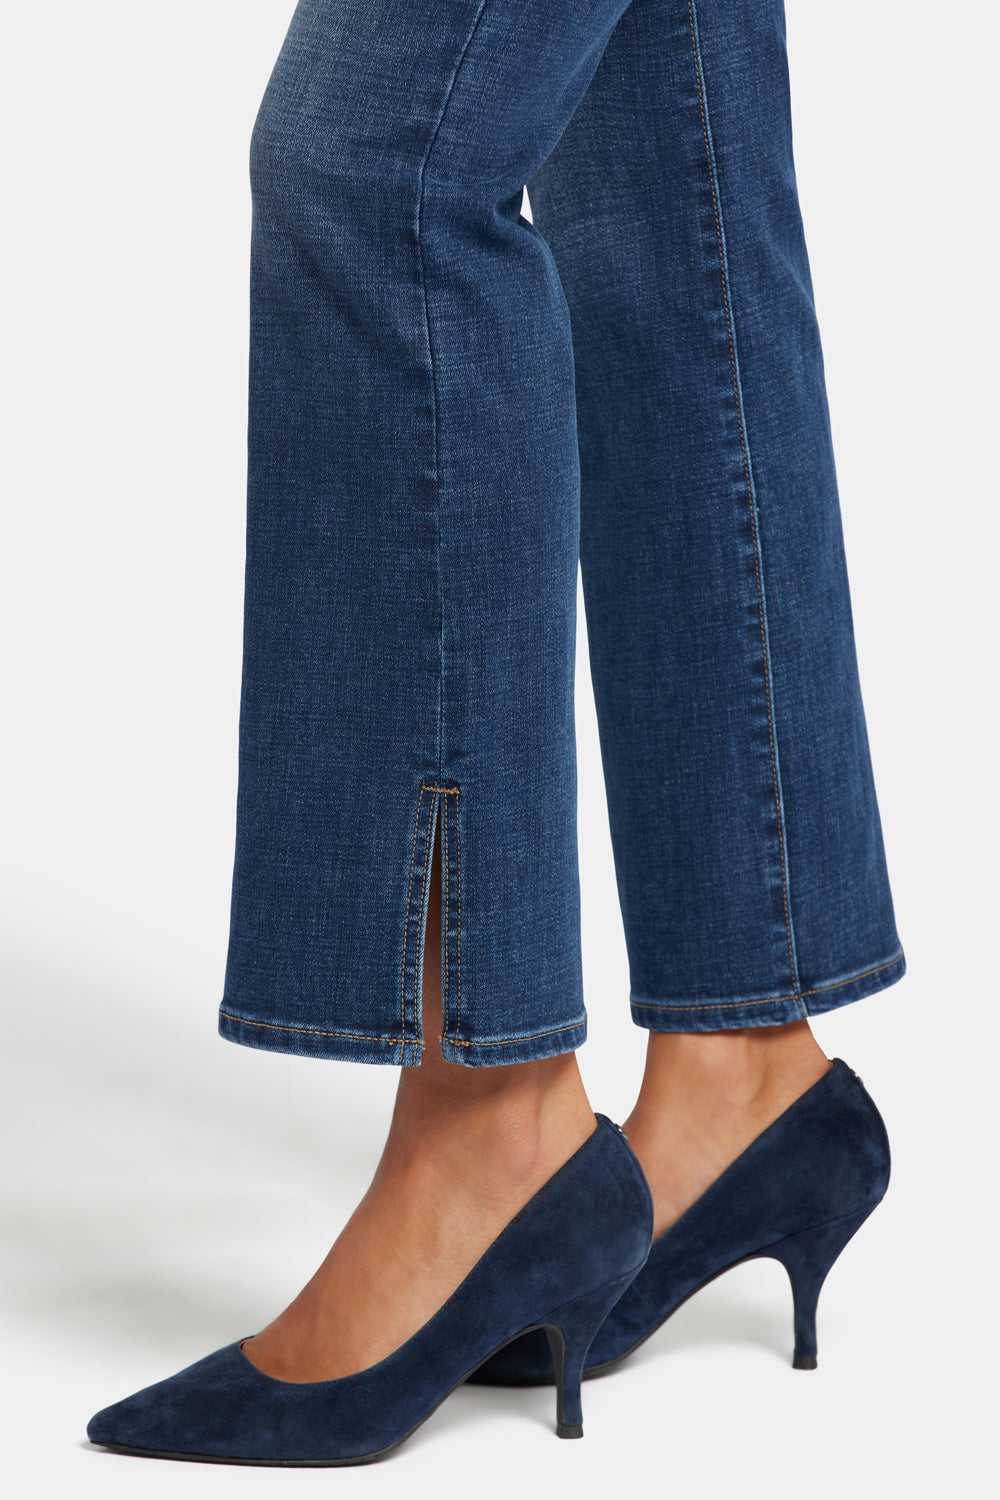 NYDJ Barbara Bootcut Jeans With Side Slits - Olympus